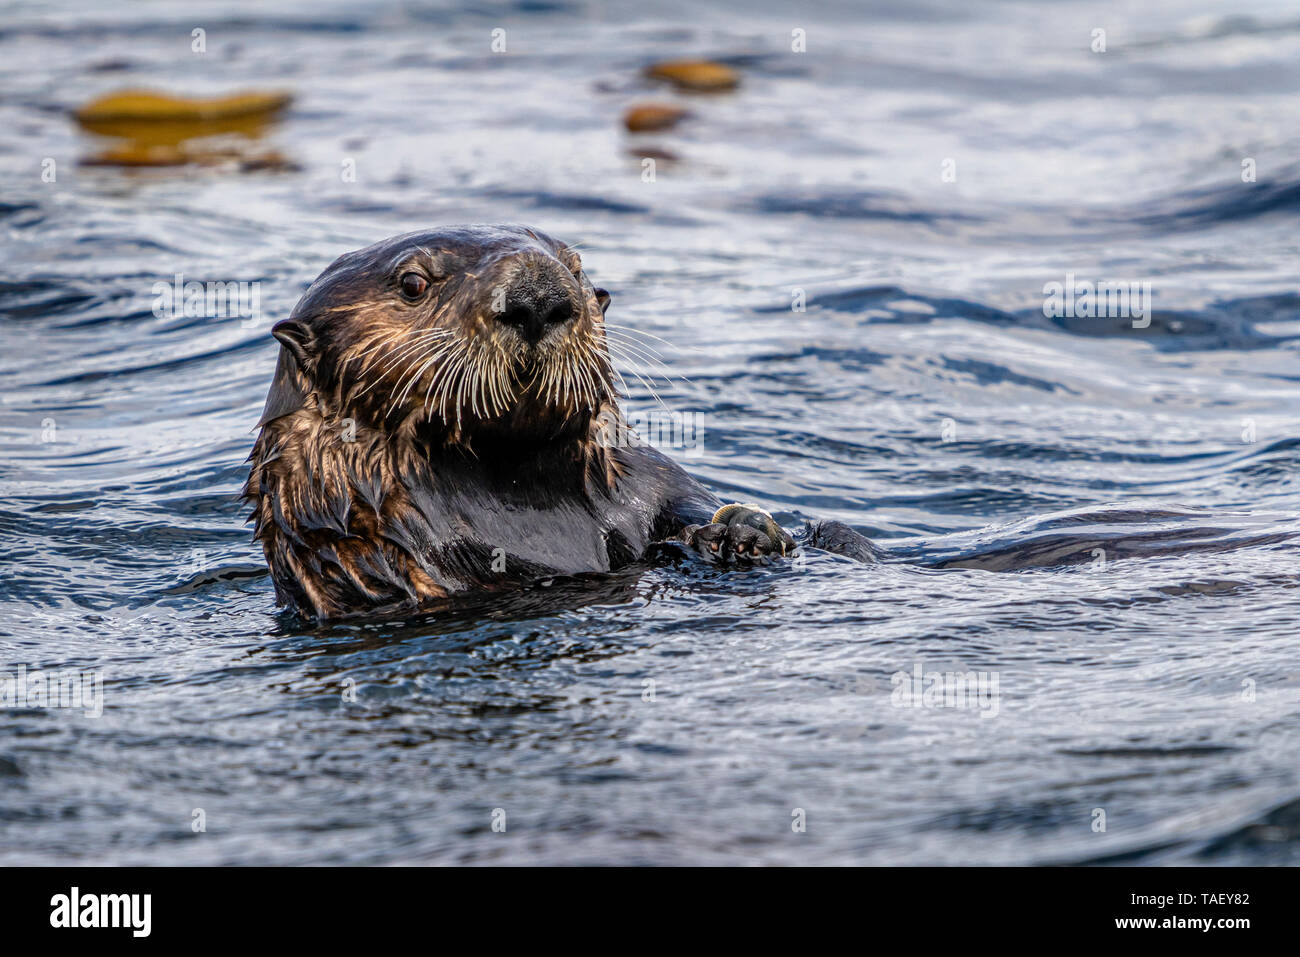 Sea otter (Enhydra lutris) eating a mussel   off the northwestern Vancouver Island shore, Cape Scott, British Columbia, Canada. Stock Photo